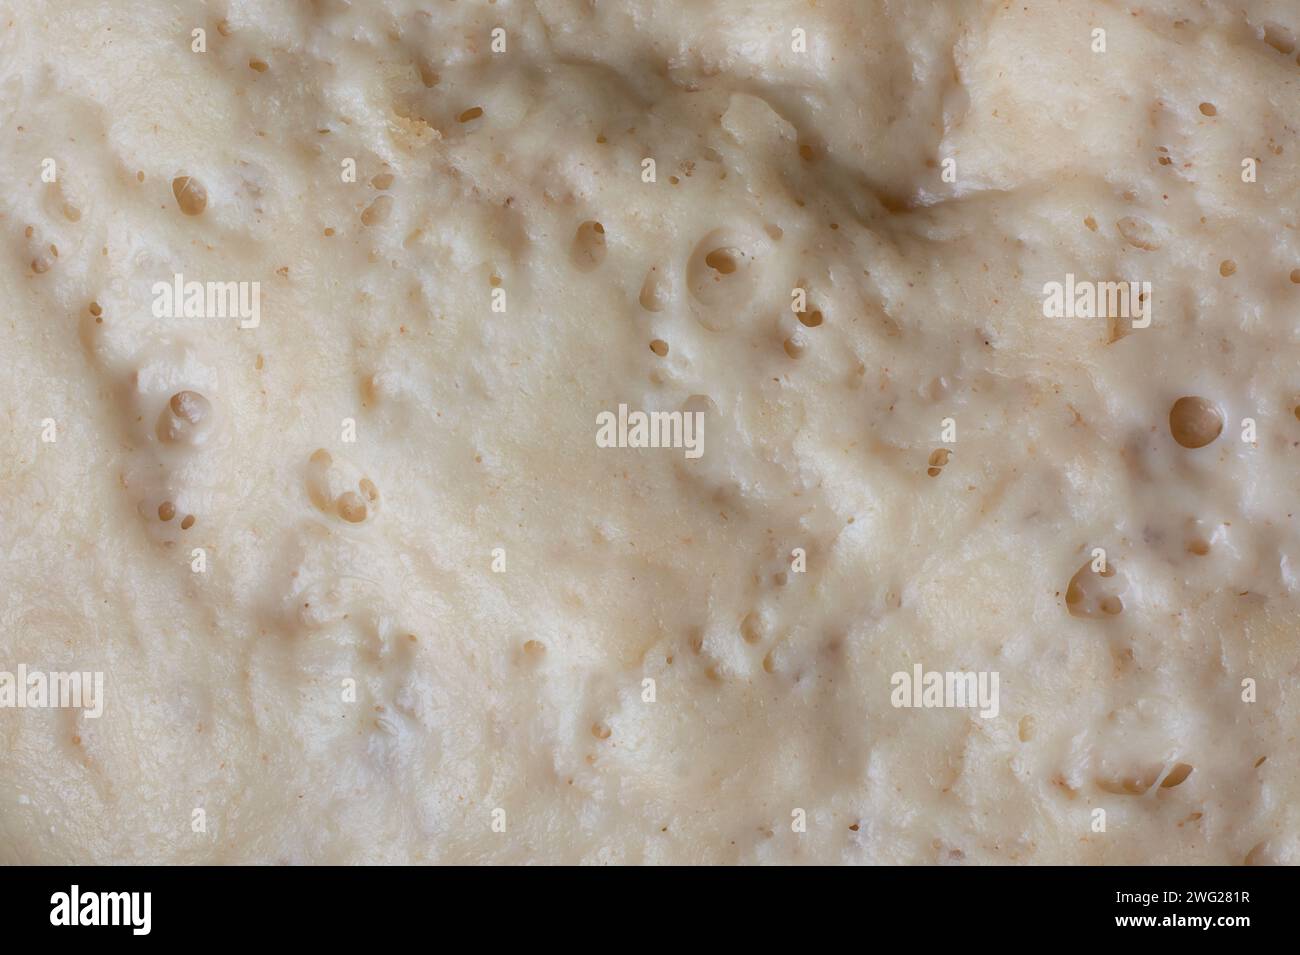 close-up macro view of rising dough surface, process of making bread, pastries or other baked goods, expansion of dough in volume, food background Stock Photo